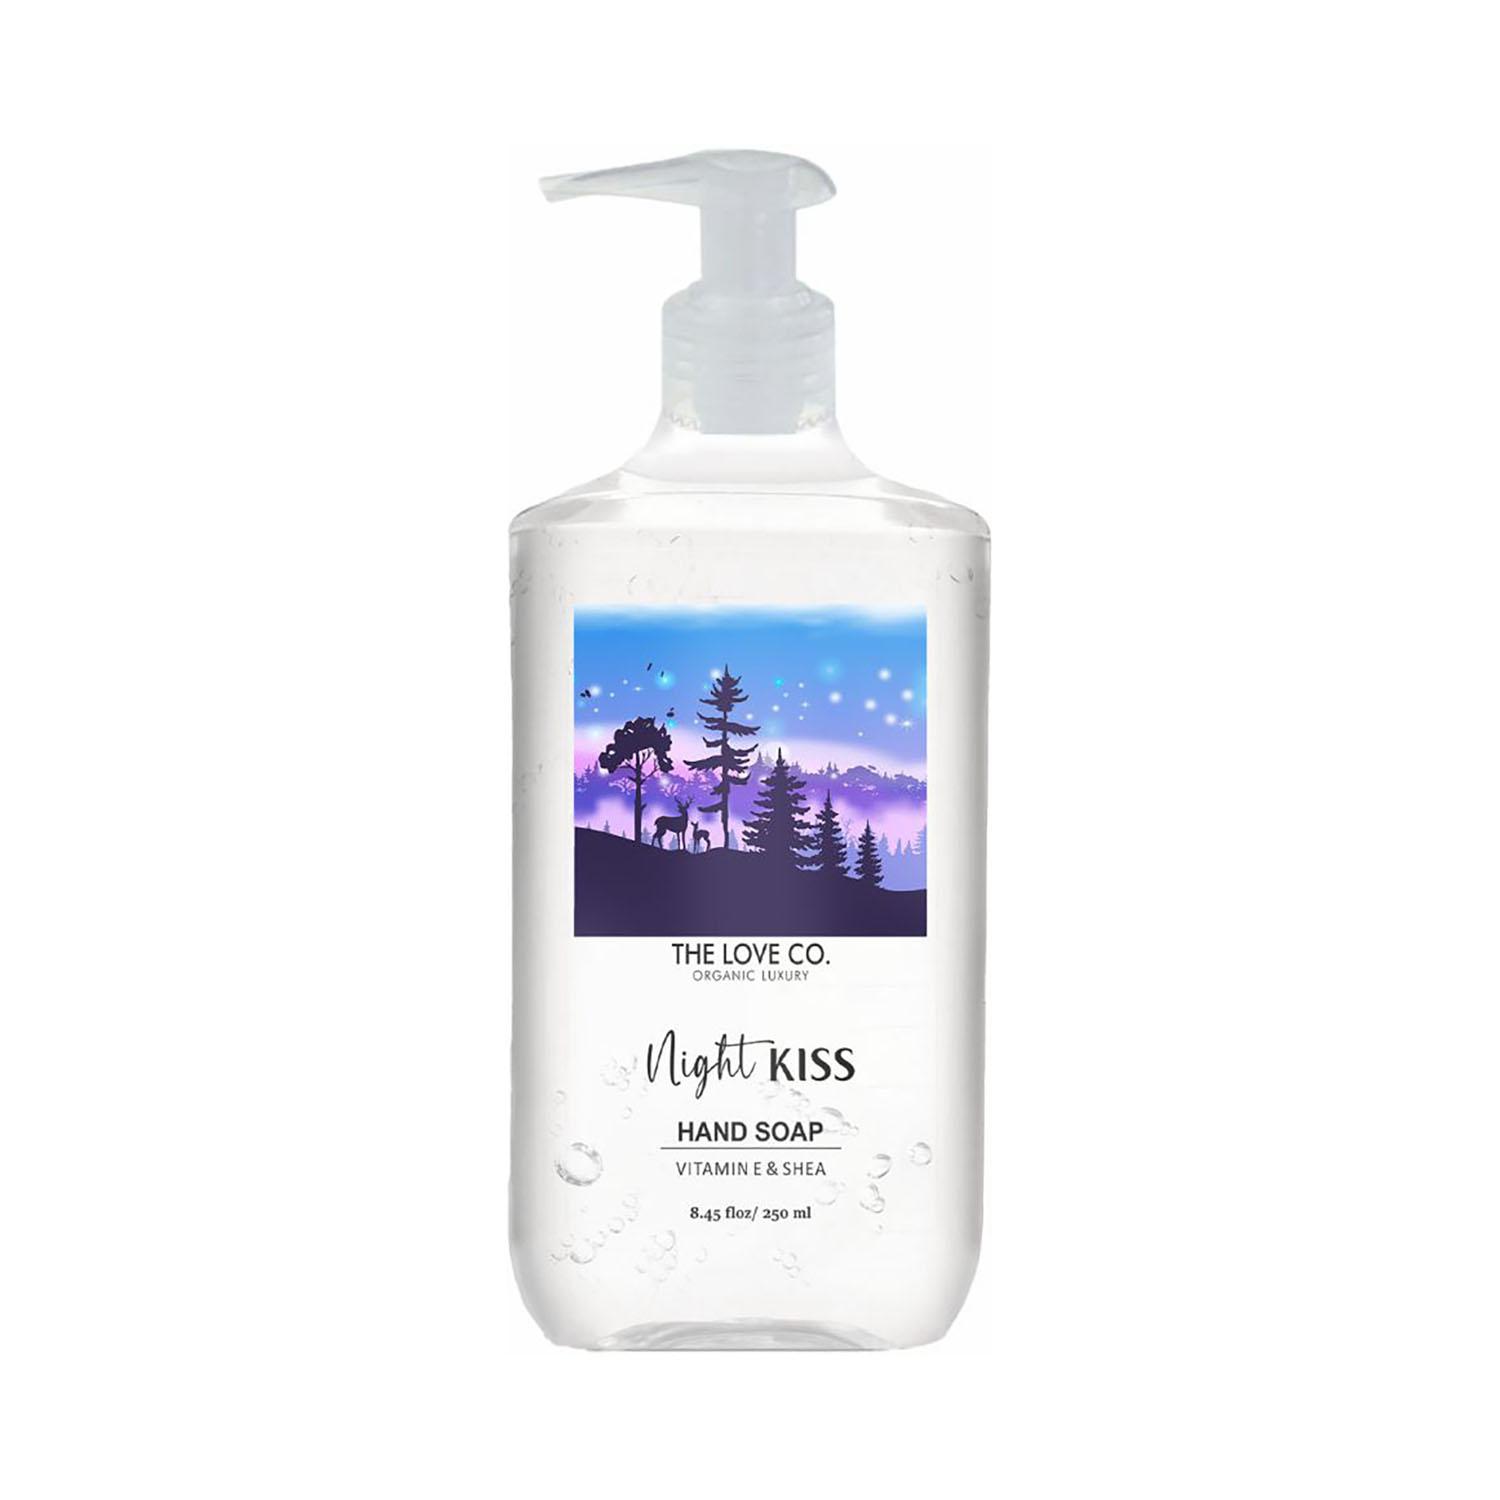 THE LOVE CO. Night Kiss Hand Soap For Moisturized Hands (250ml)